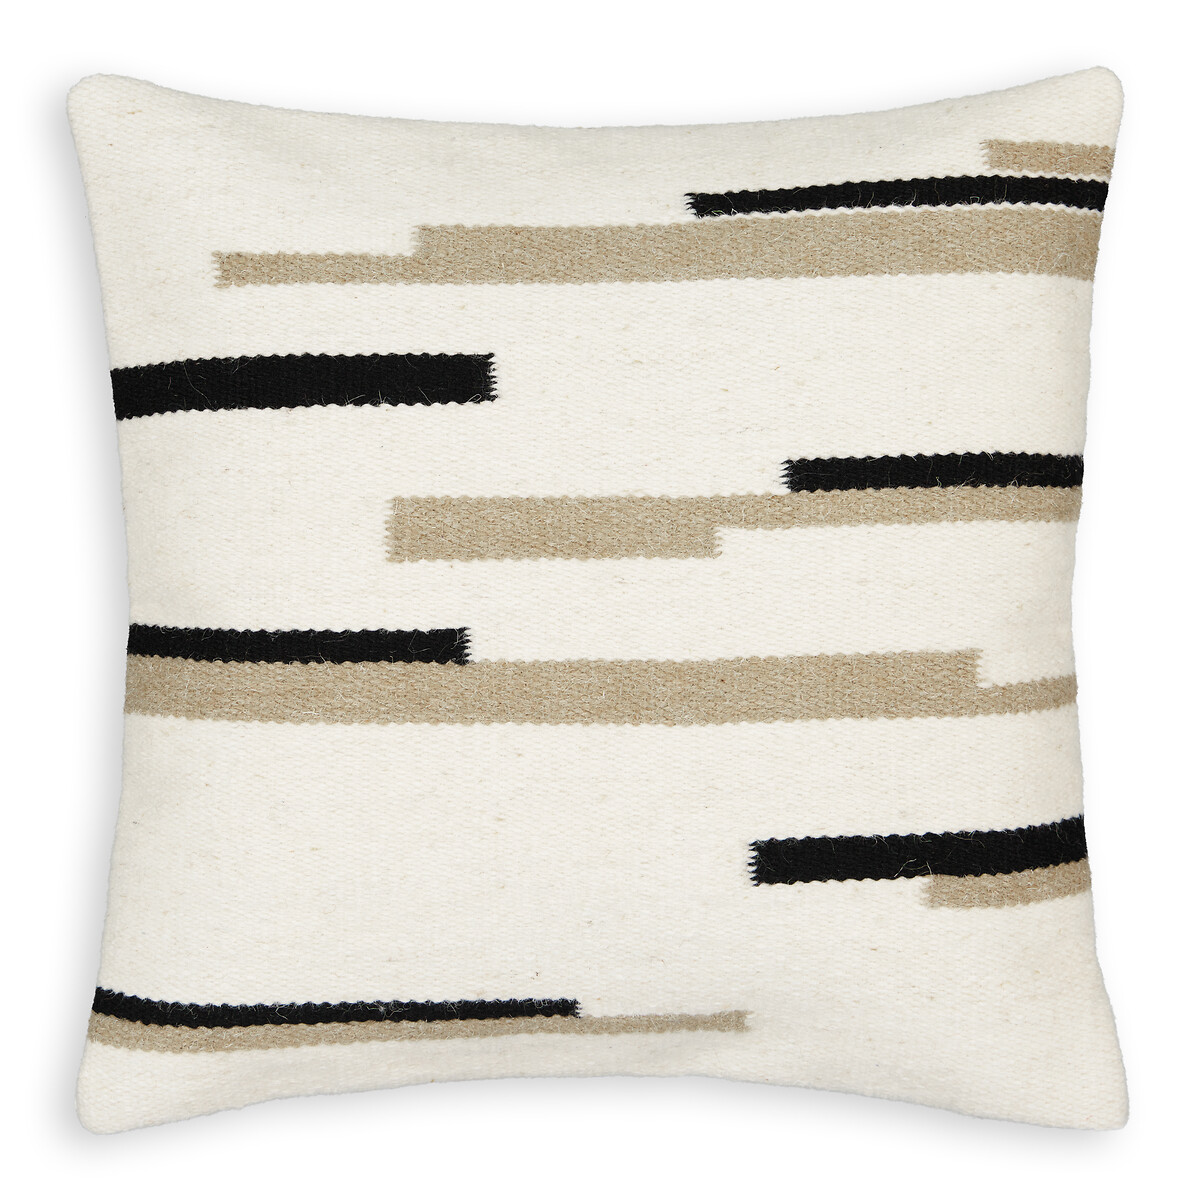 Nelio Striped Wool Blend Square Cushion Cover